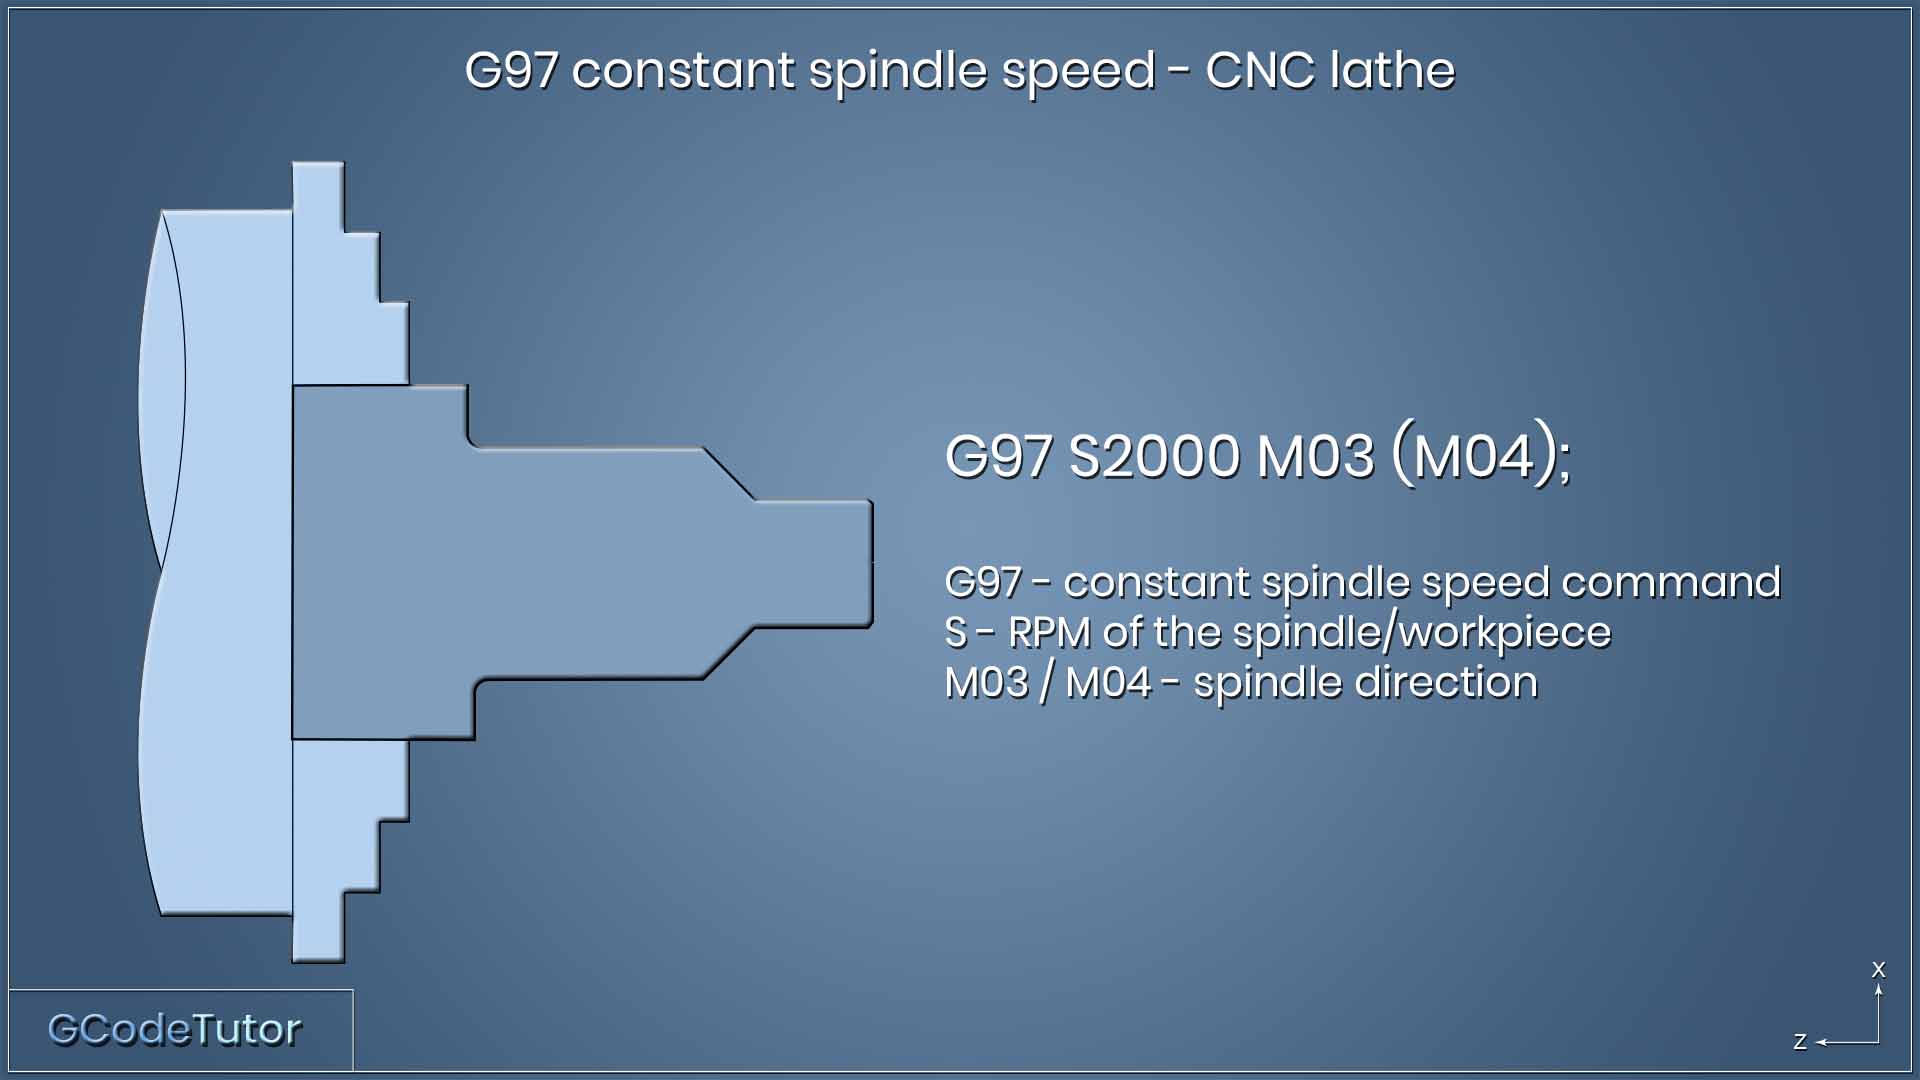 The Different Ways to Control Spindle Speed with G-code